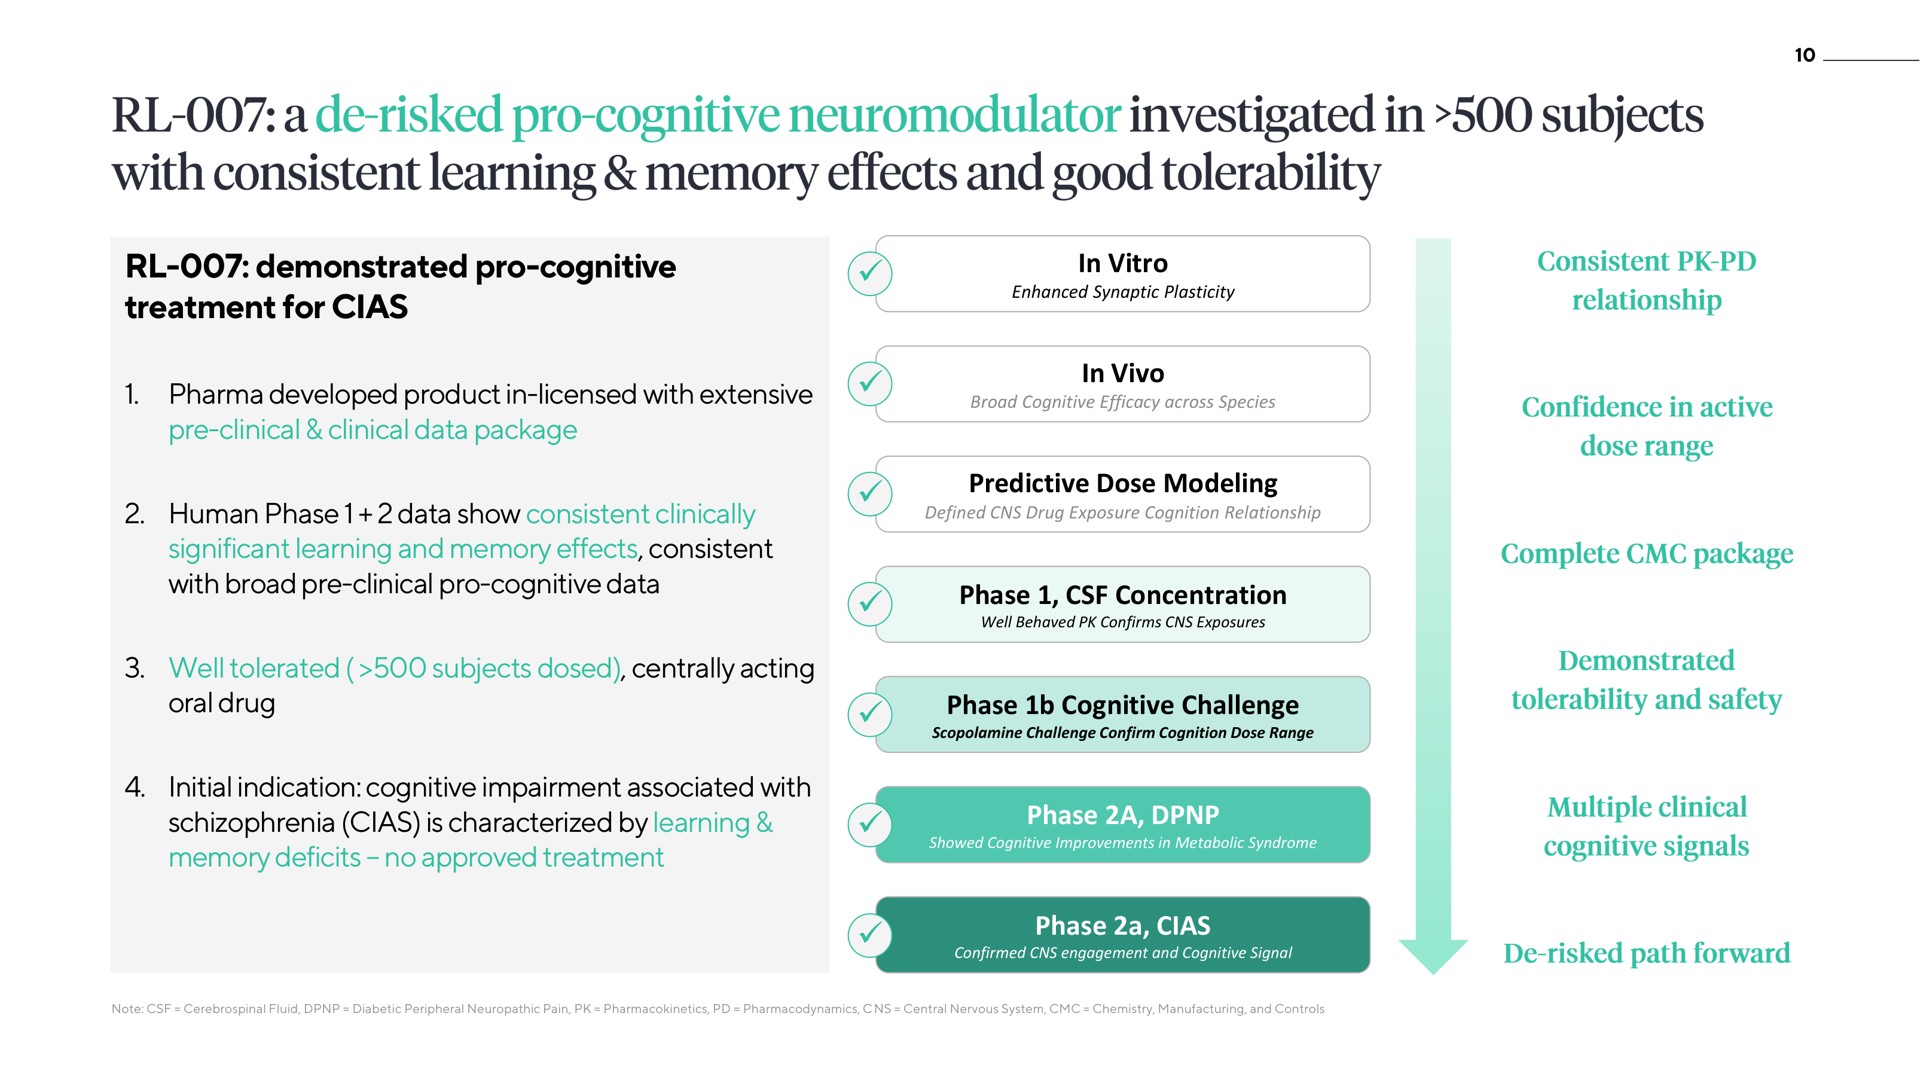 demonstrated pro cognitive treatment for developed product in licensed with extensive clinical clinical data package human phase data show consistent clinically significant learning and memory effects consistent with broad clinical pro cognitive data well tolerated subjects dosed centrally acting oral drug initial indication cognitive impairment associated with schizophrenia is characterized by learning memory deficits no approved treatment in in predictive dose modeling phase concentration phase cognitive challenge phase a phase a a risked investigated good tolerability | ATAI